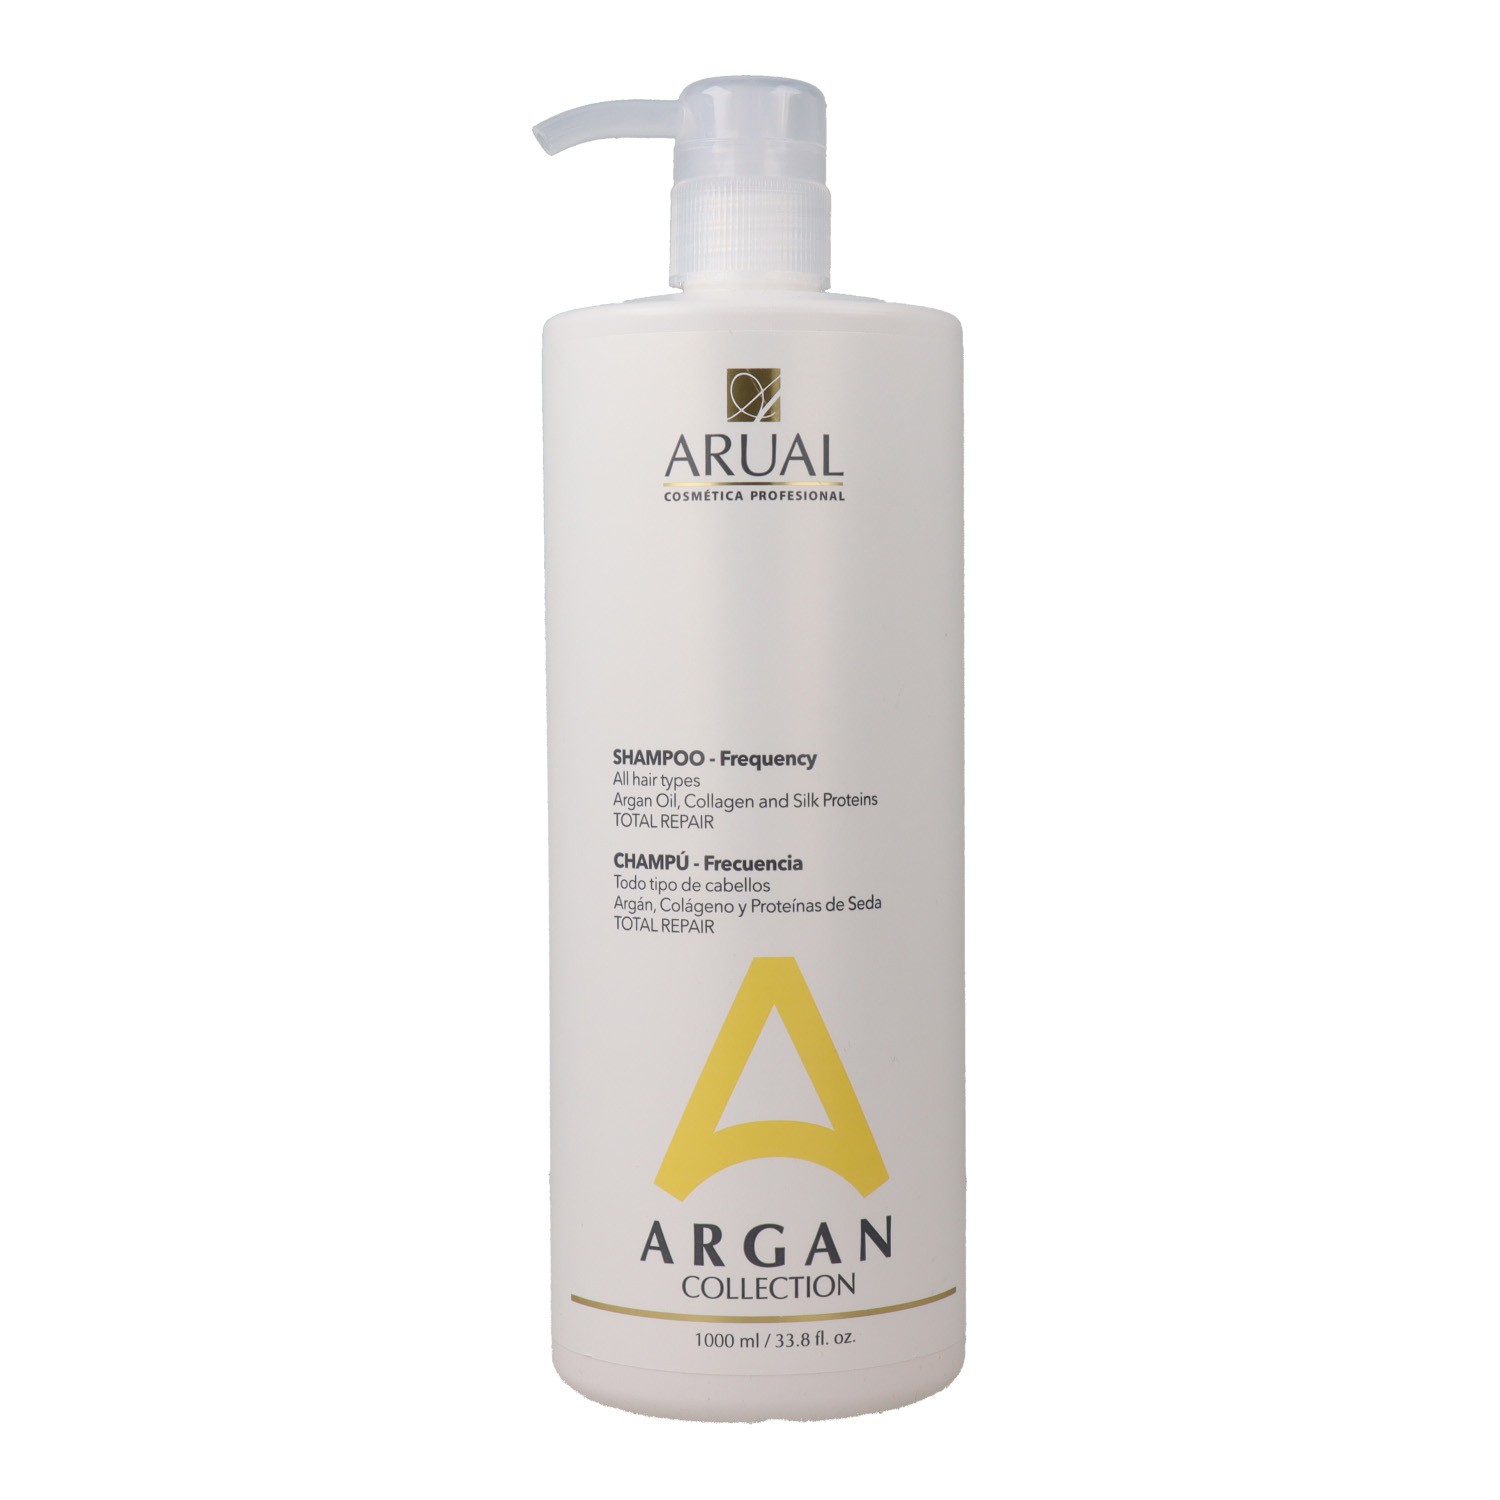 Arual Argan Collection Frequency Shampoo 1000 ml